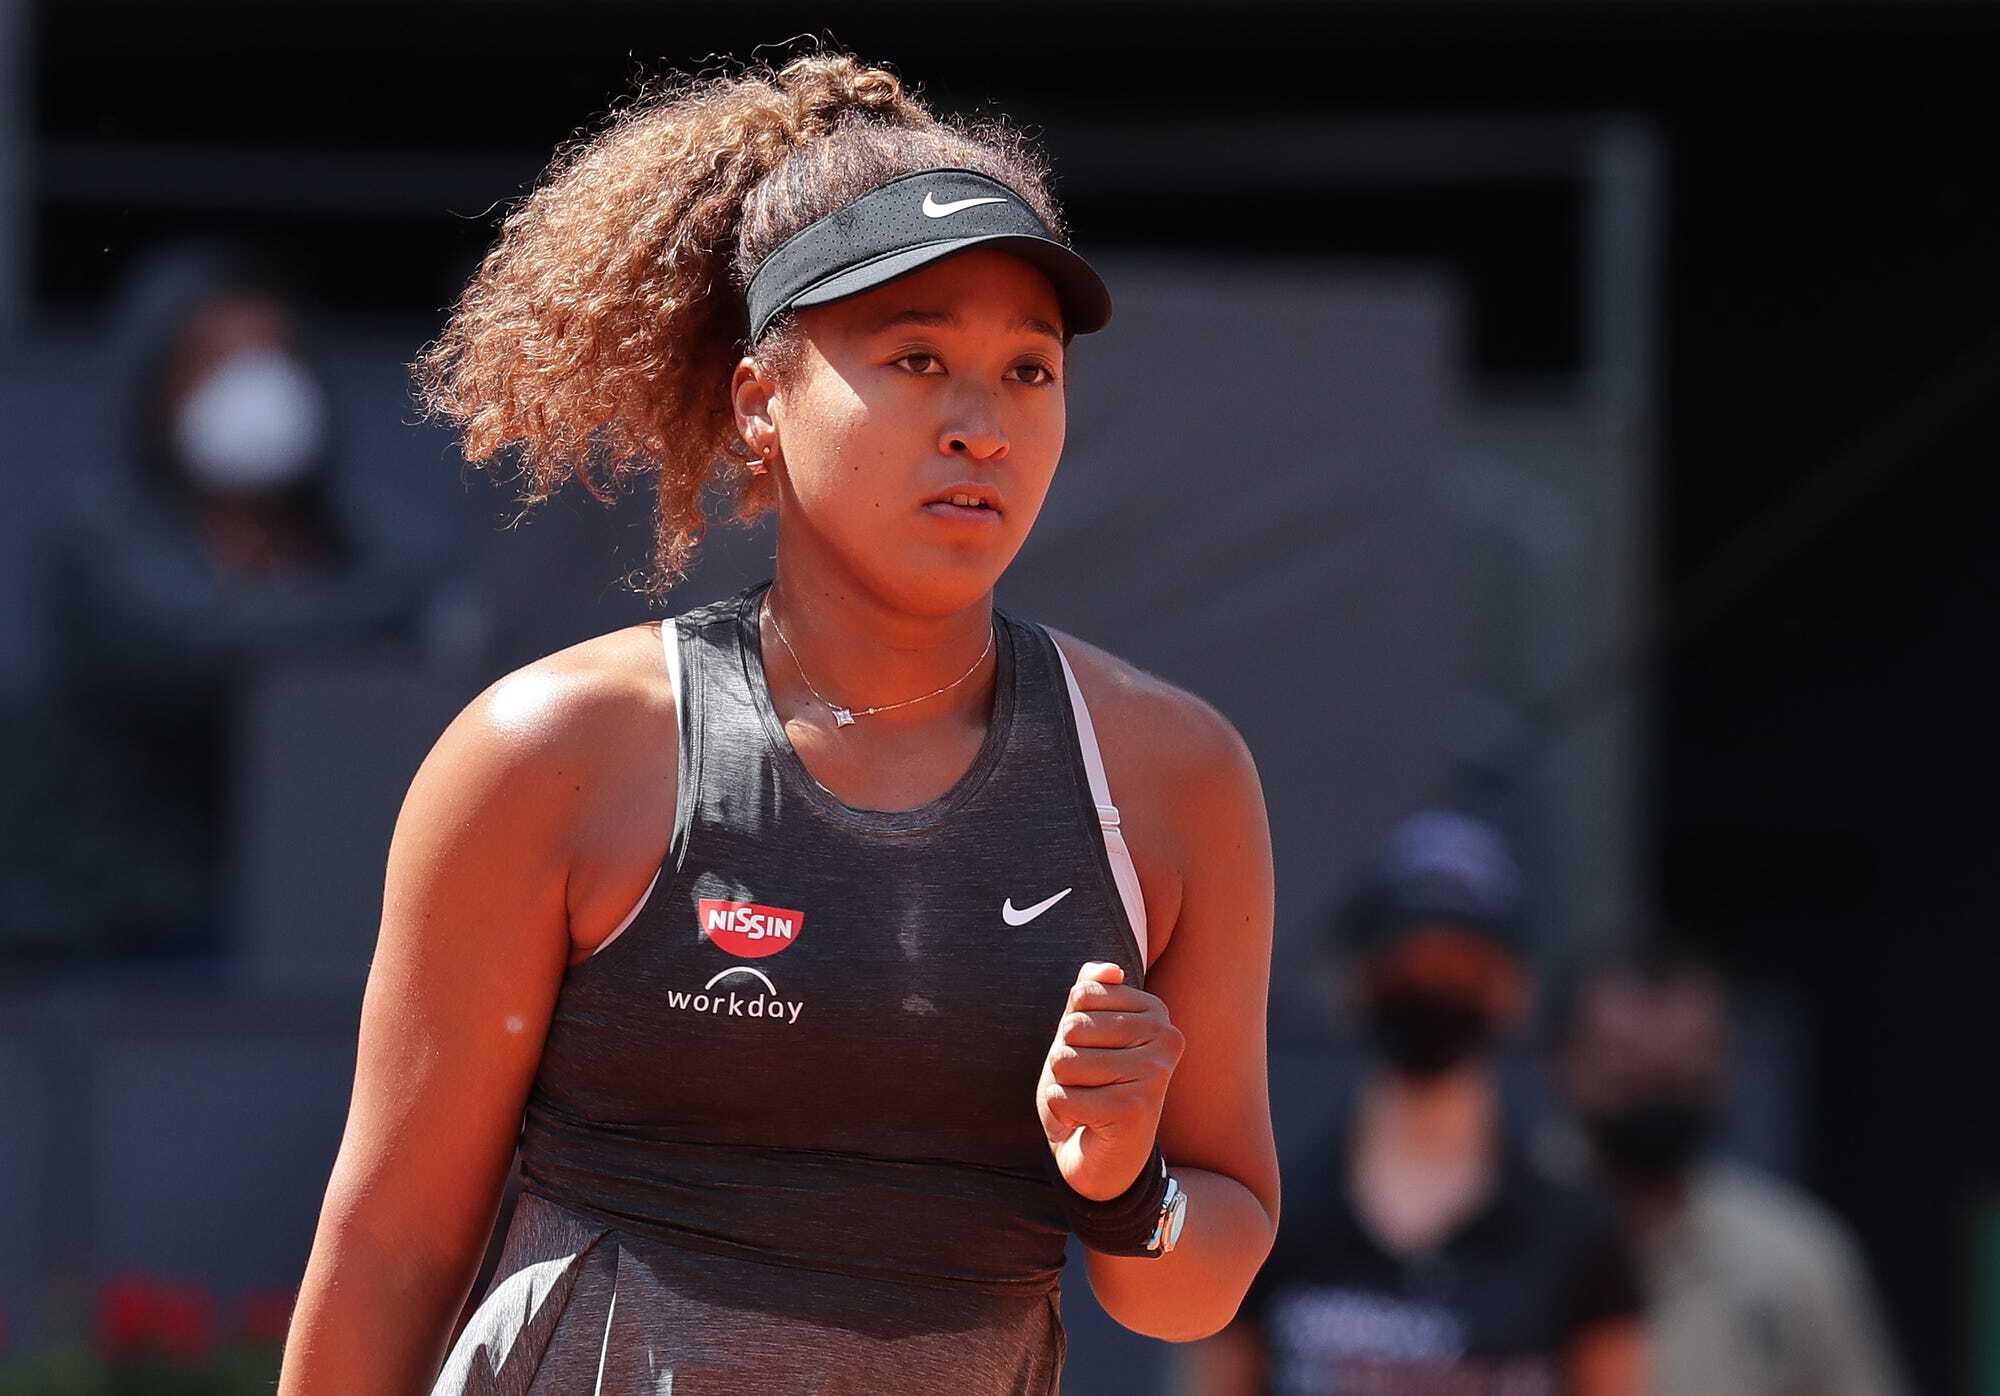 Naomi Osaka was born in Japan and moved to the US as a child.